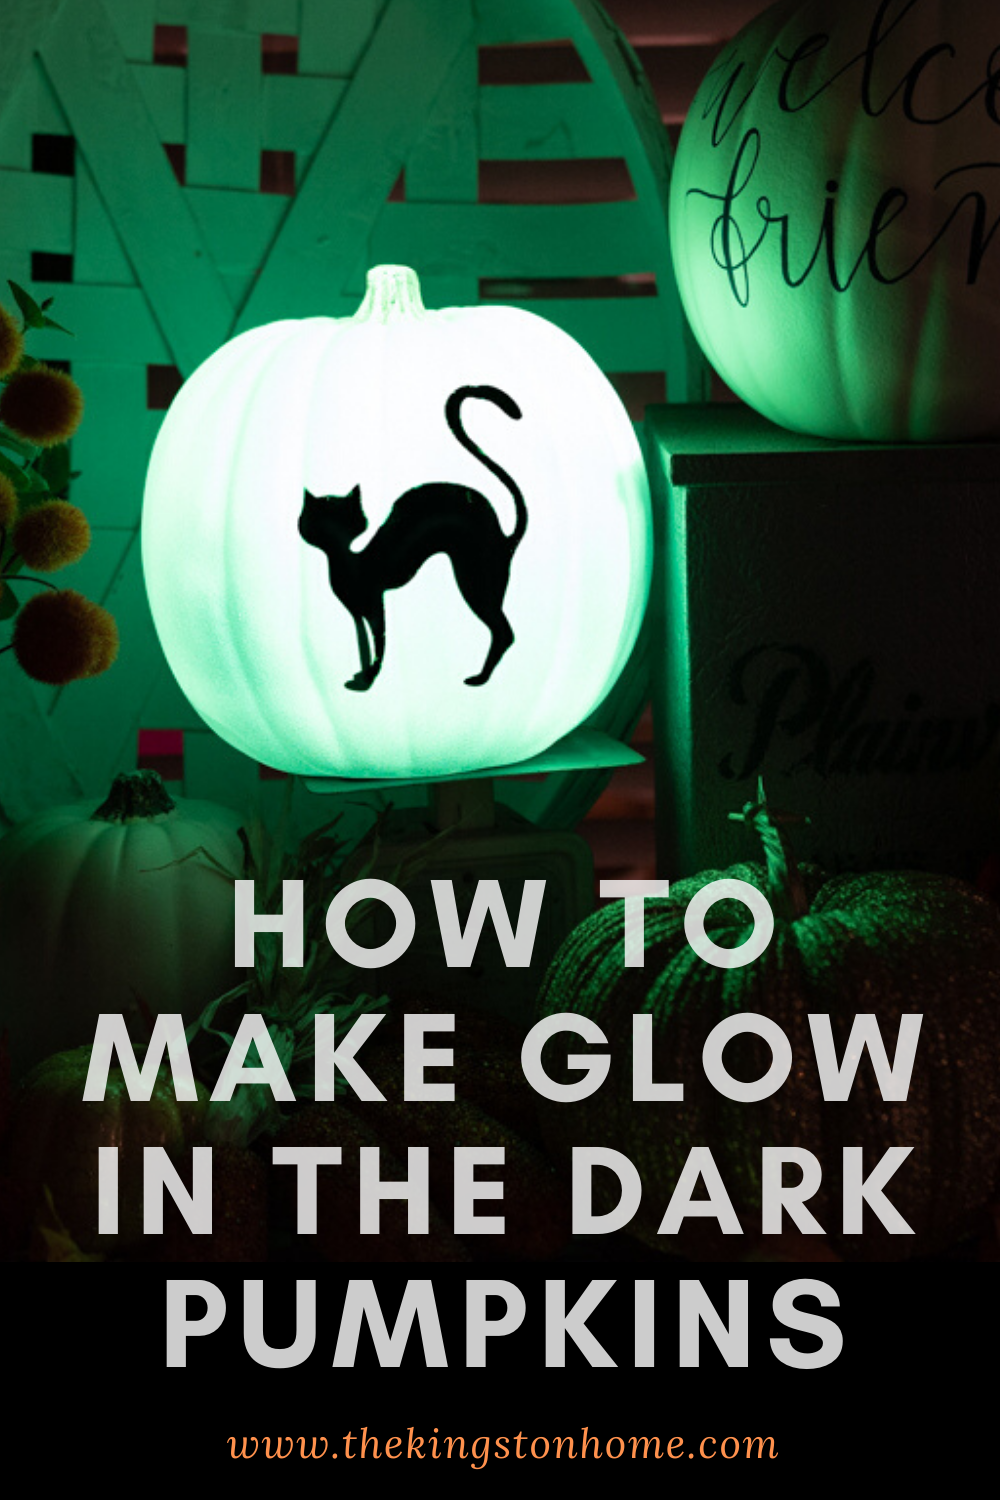 How To Make Glow In The Dark Pumpkins - The Kingston Home